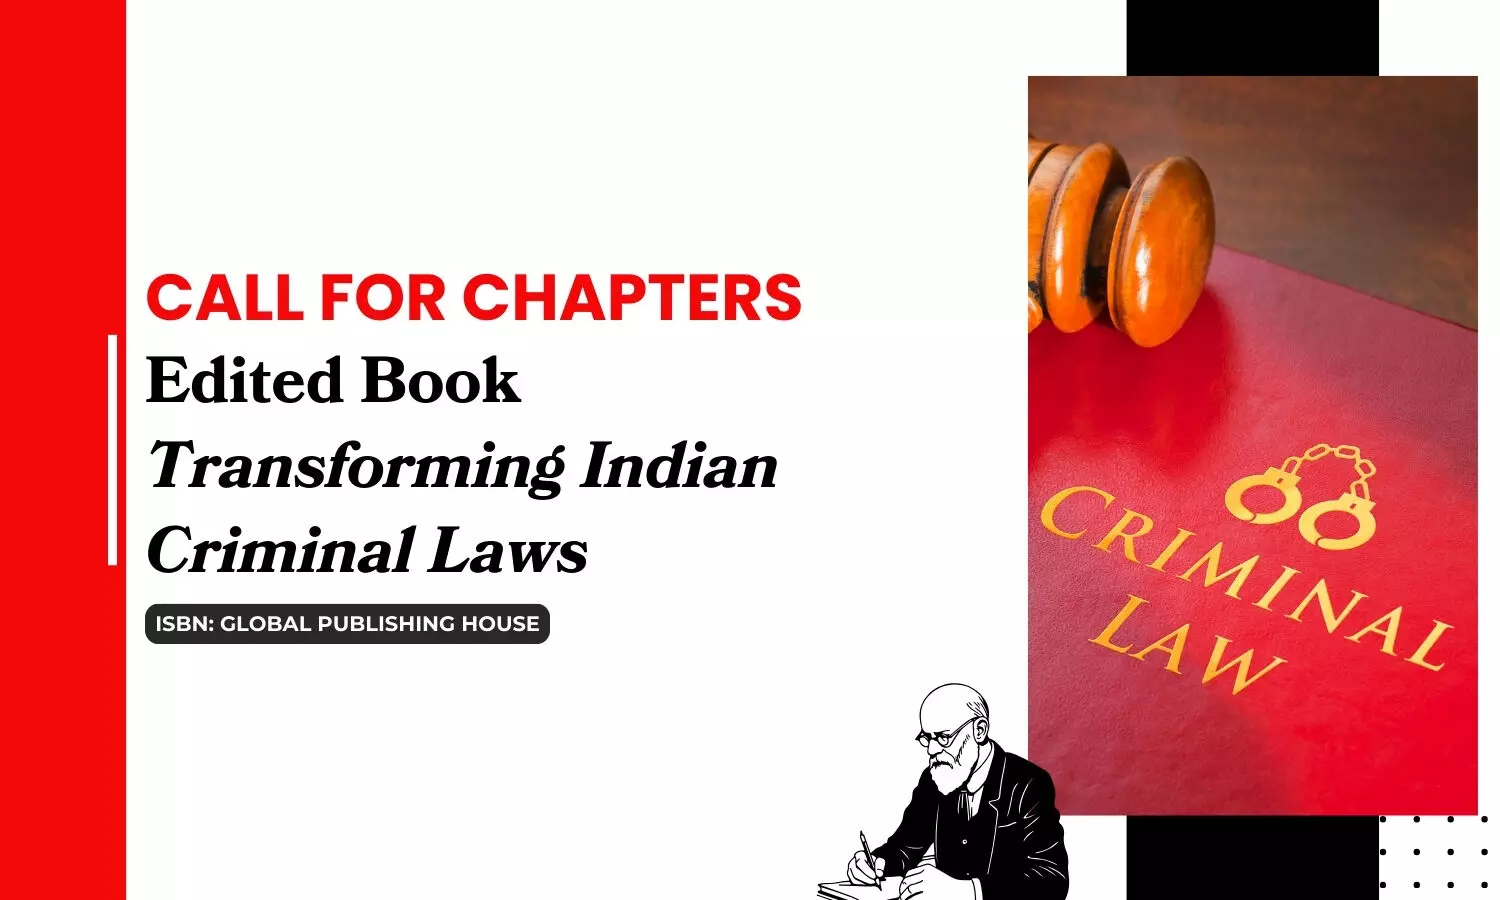 Call for Chapters for an Edited Book on Transforming Indian Criminal Laws (with ISBN)